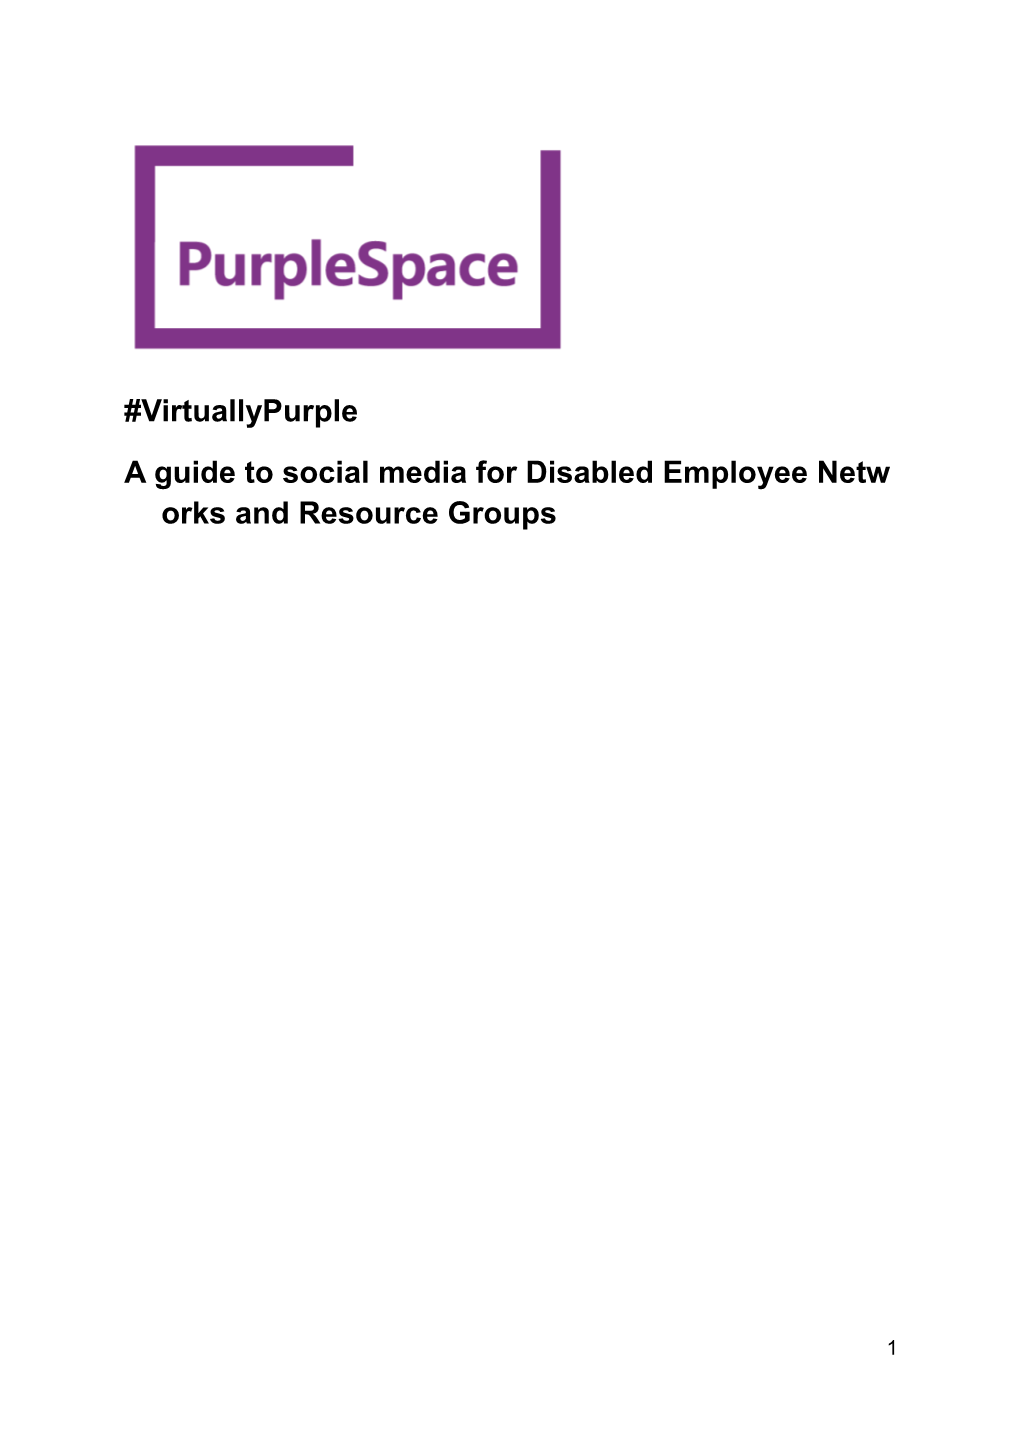 A Guide to Social Media for Disabled Employee Networks and Resource Groups